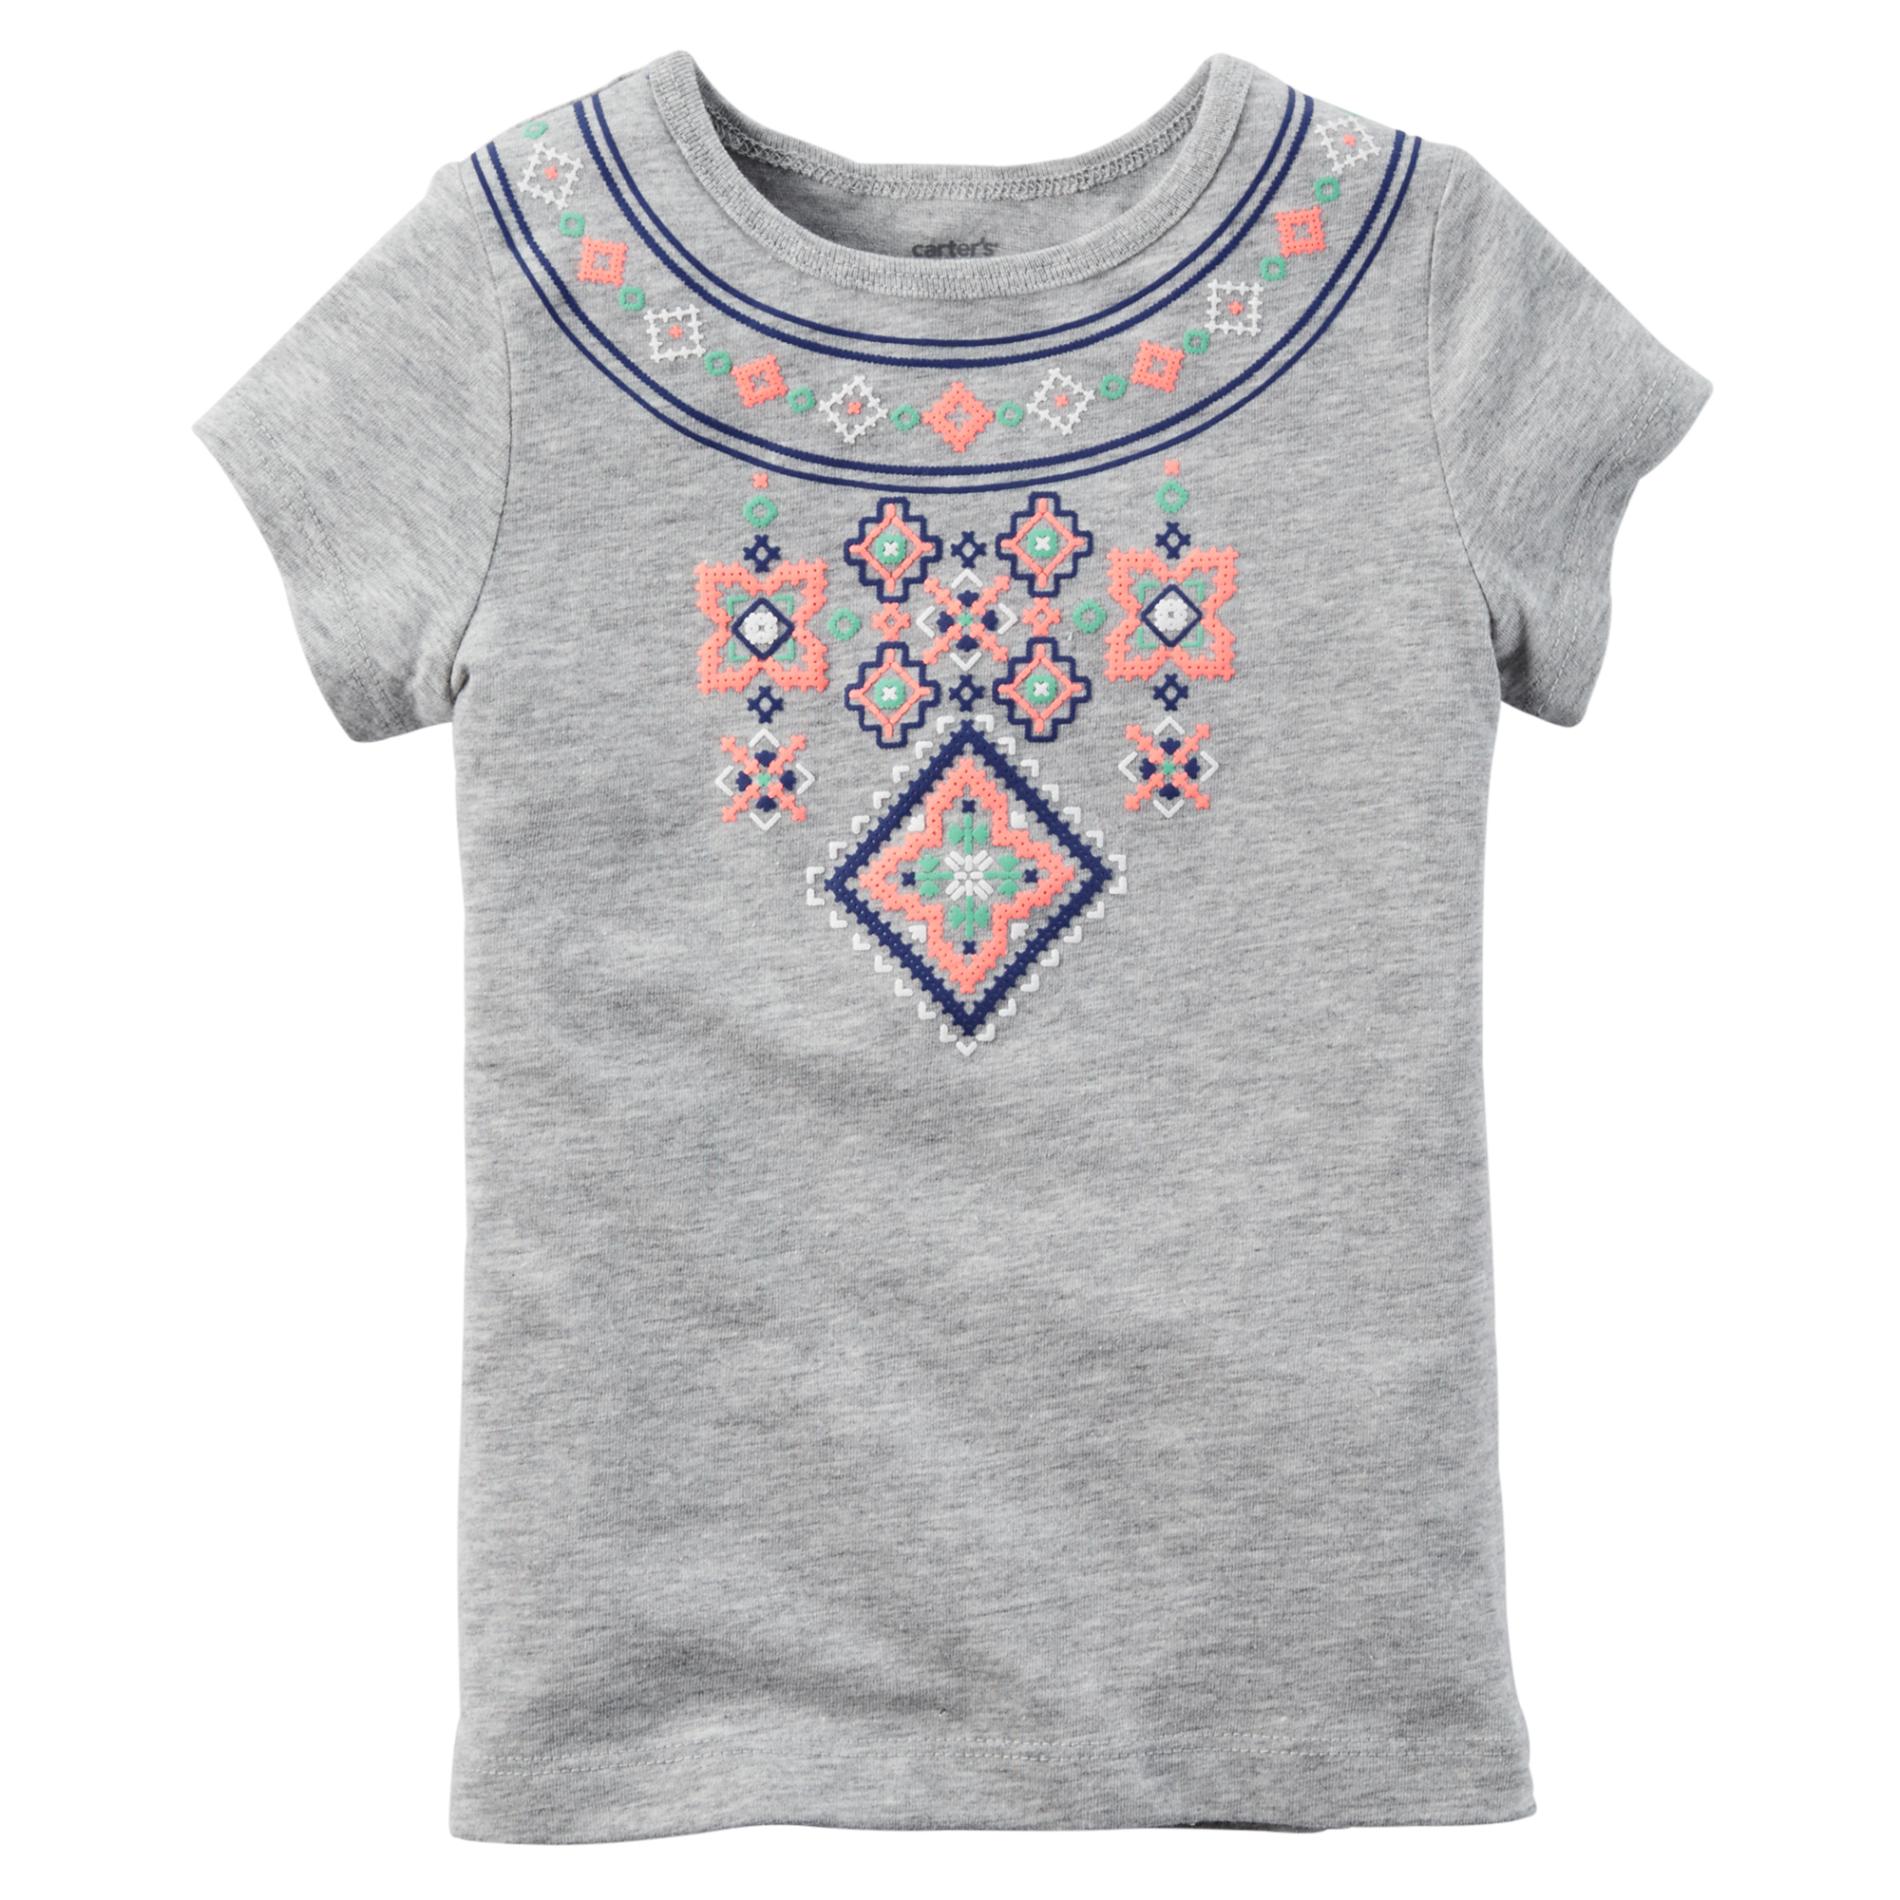 Girl's Embroidered T-Shirt - Tribal